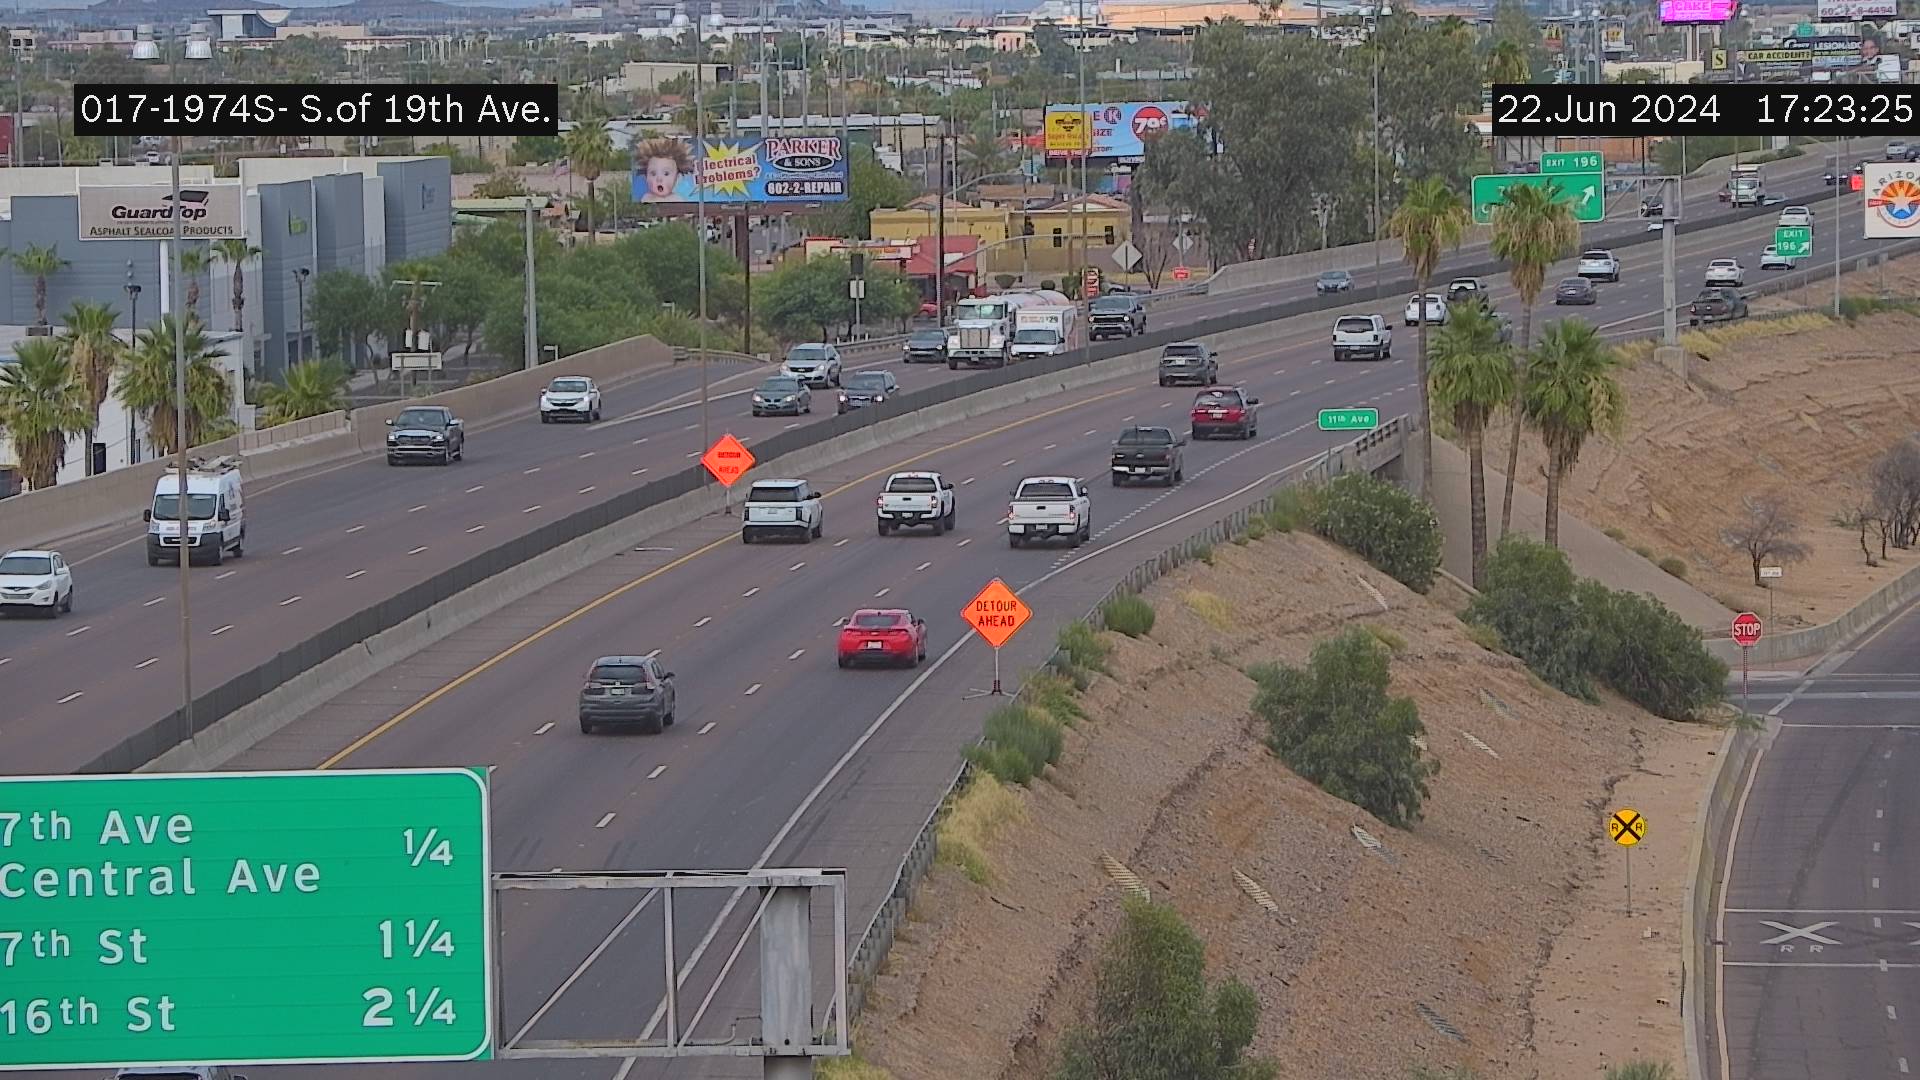 Traffic Cam I-17 SB 197.42 @S of 19th Ave -  Southbound Player